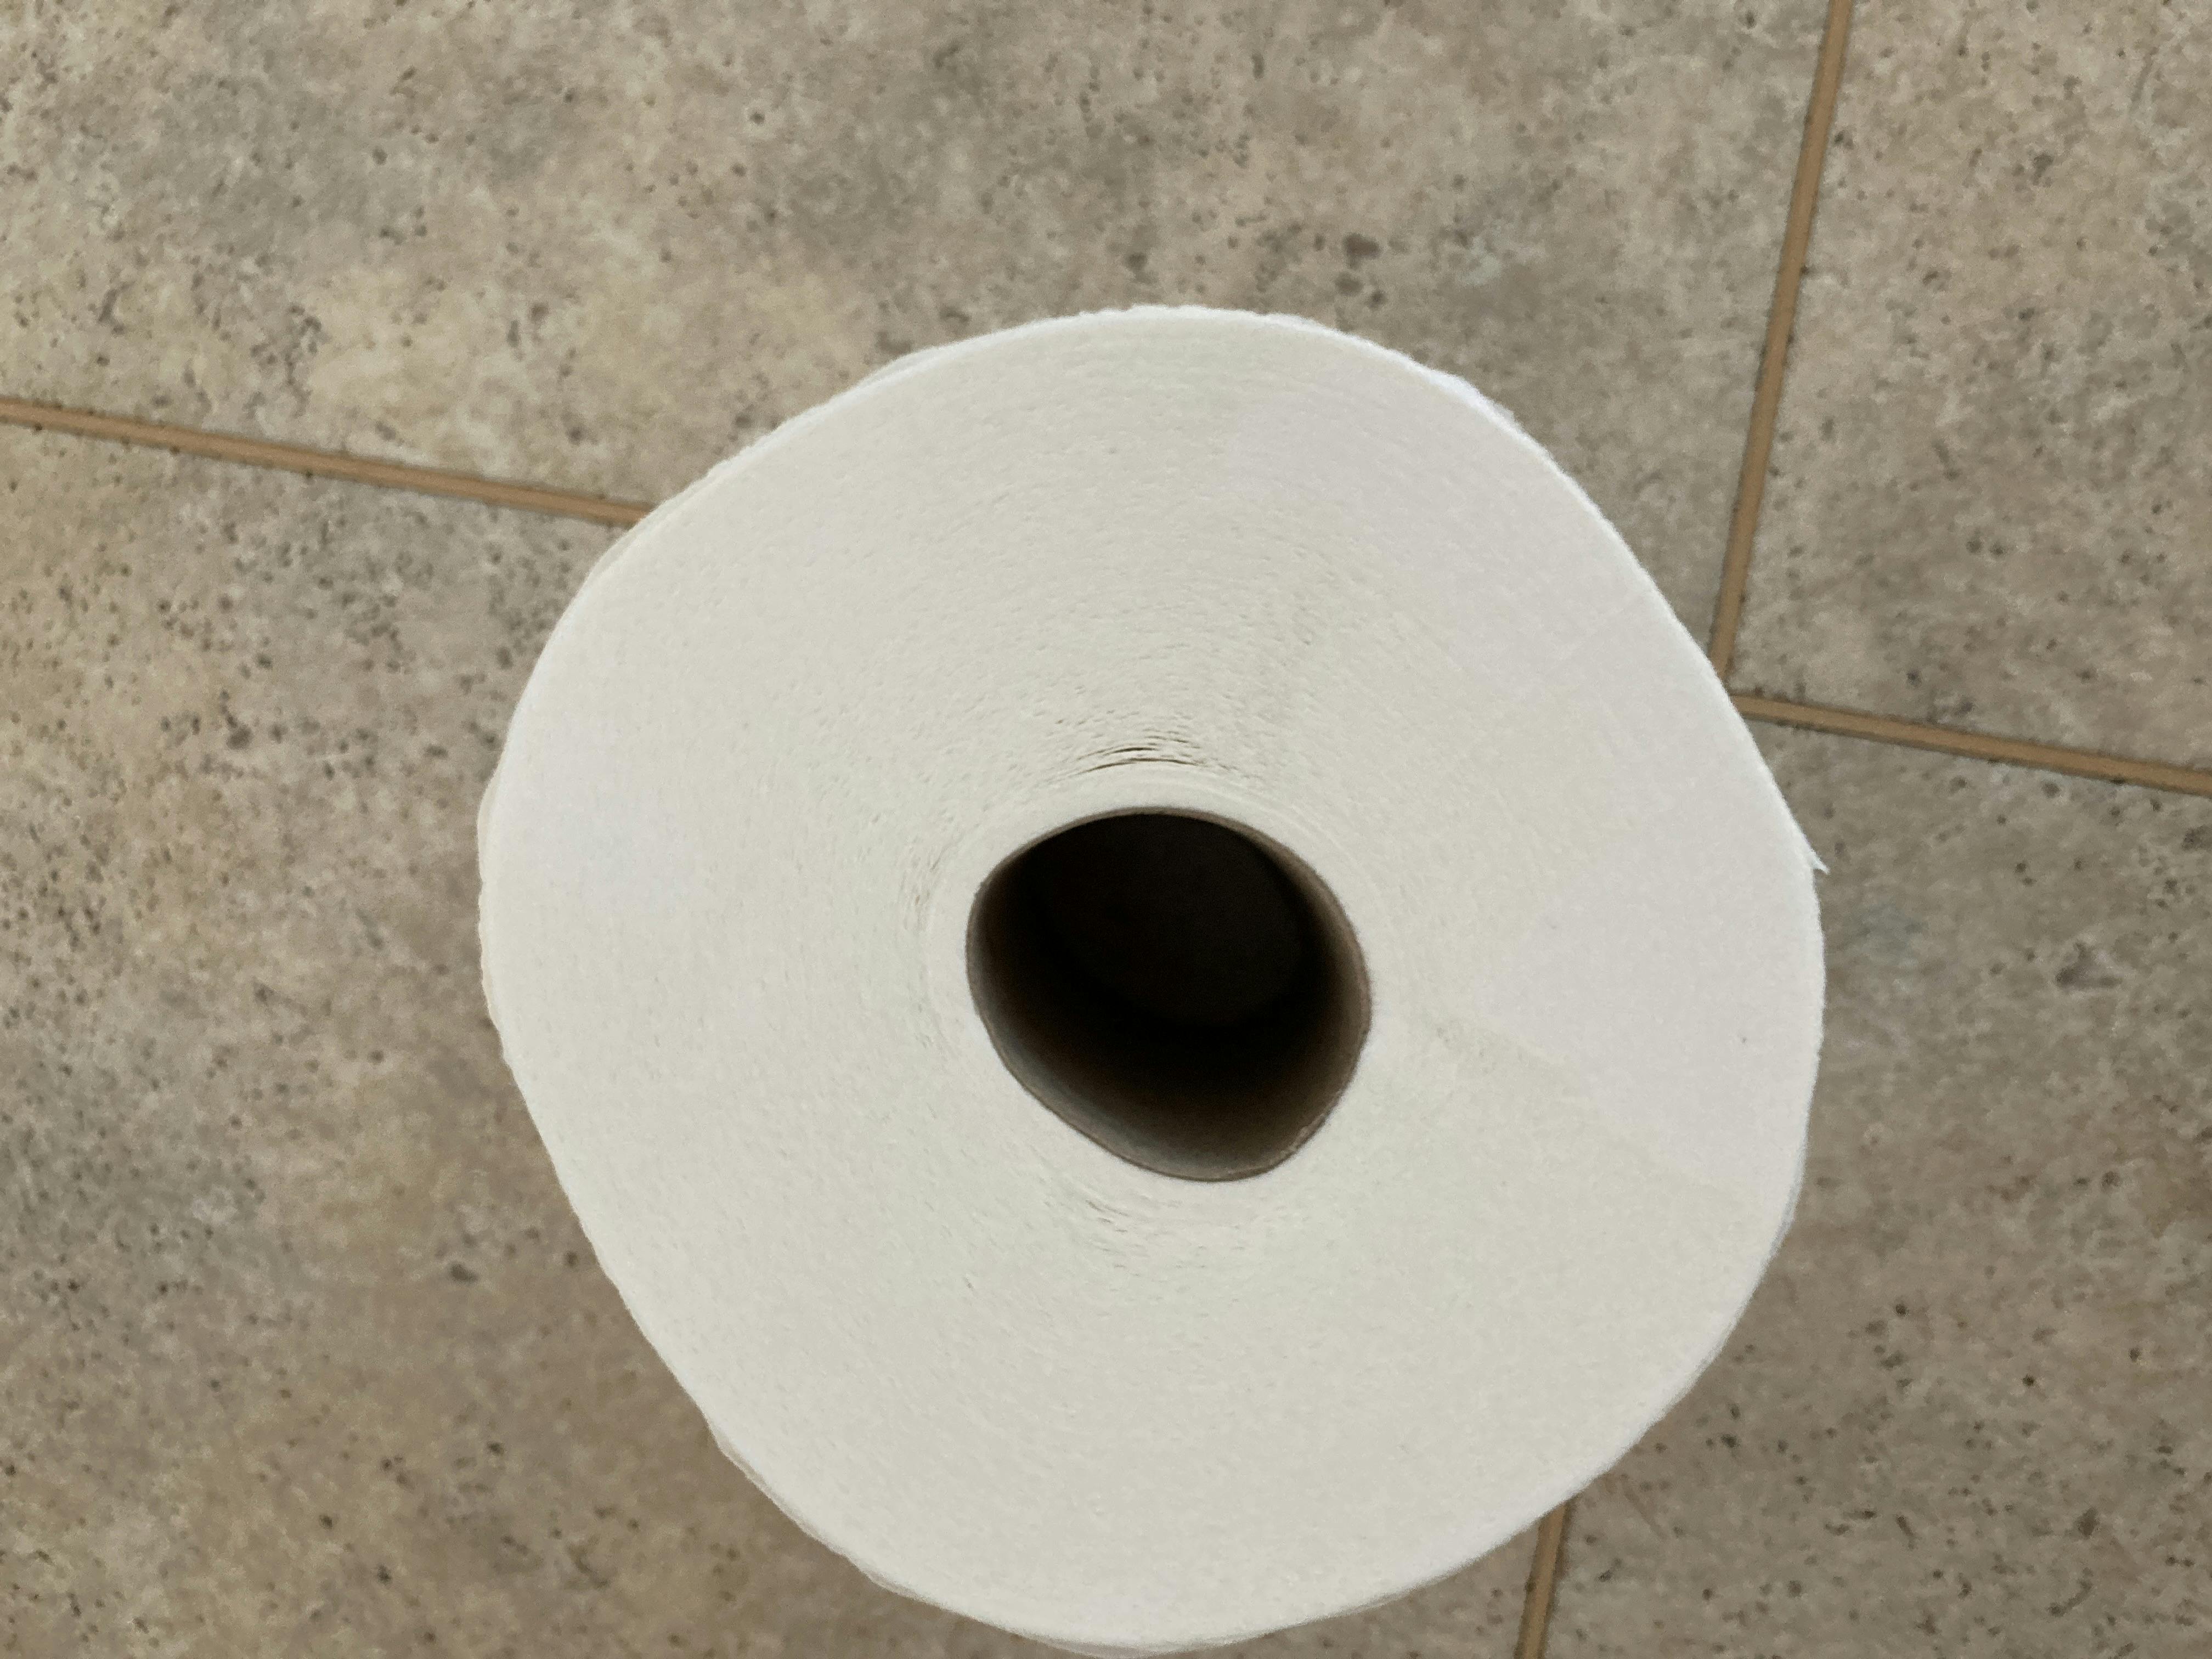 Why did the toilet paper roll down the hill? To get to the bottom